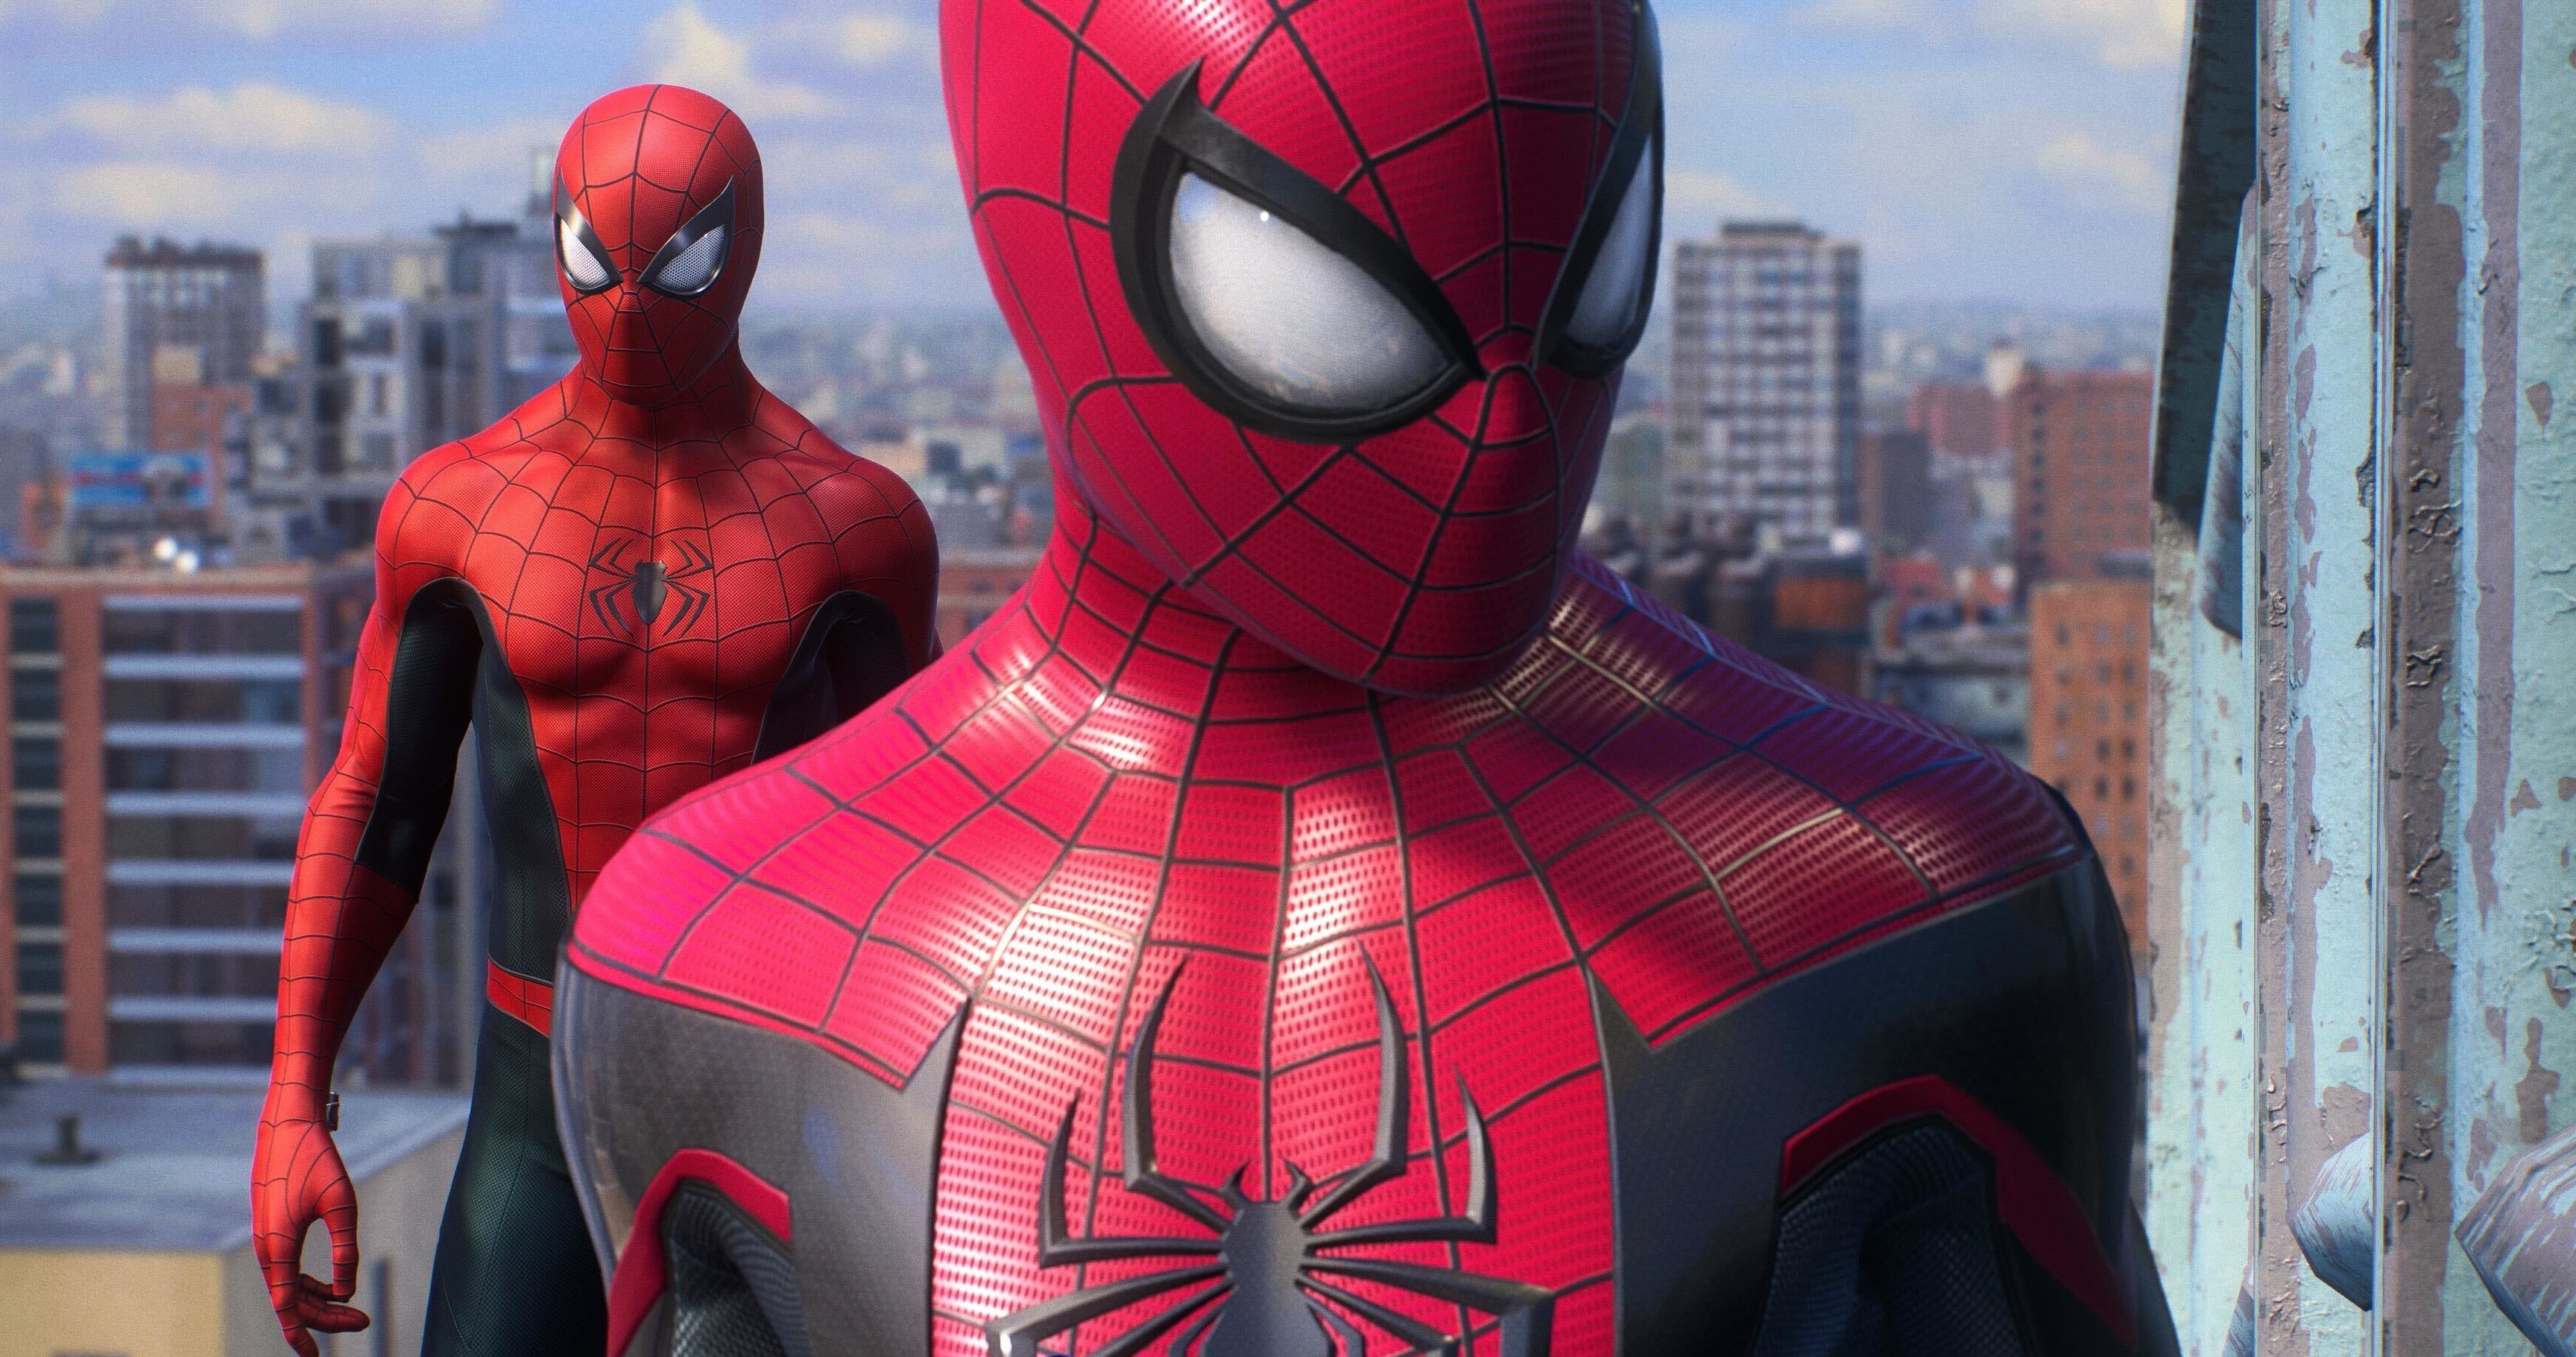 Marvel's Spider-Man 2' review: It's the anti-'Starfield